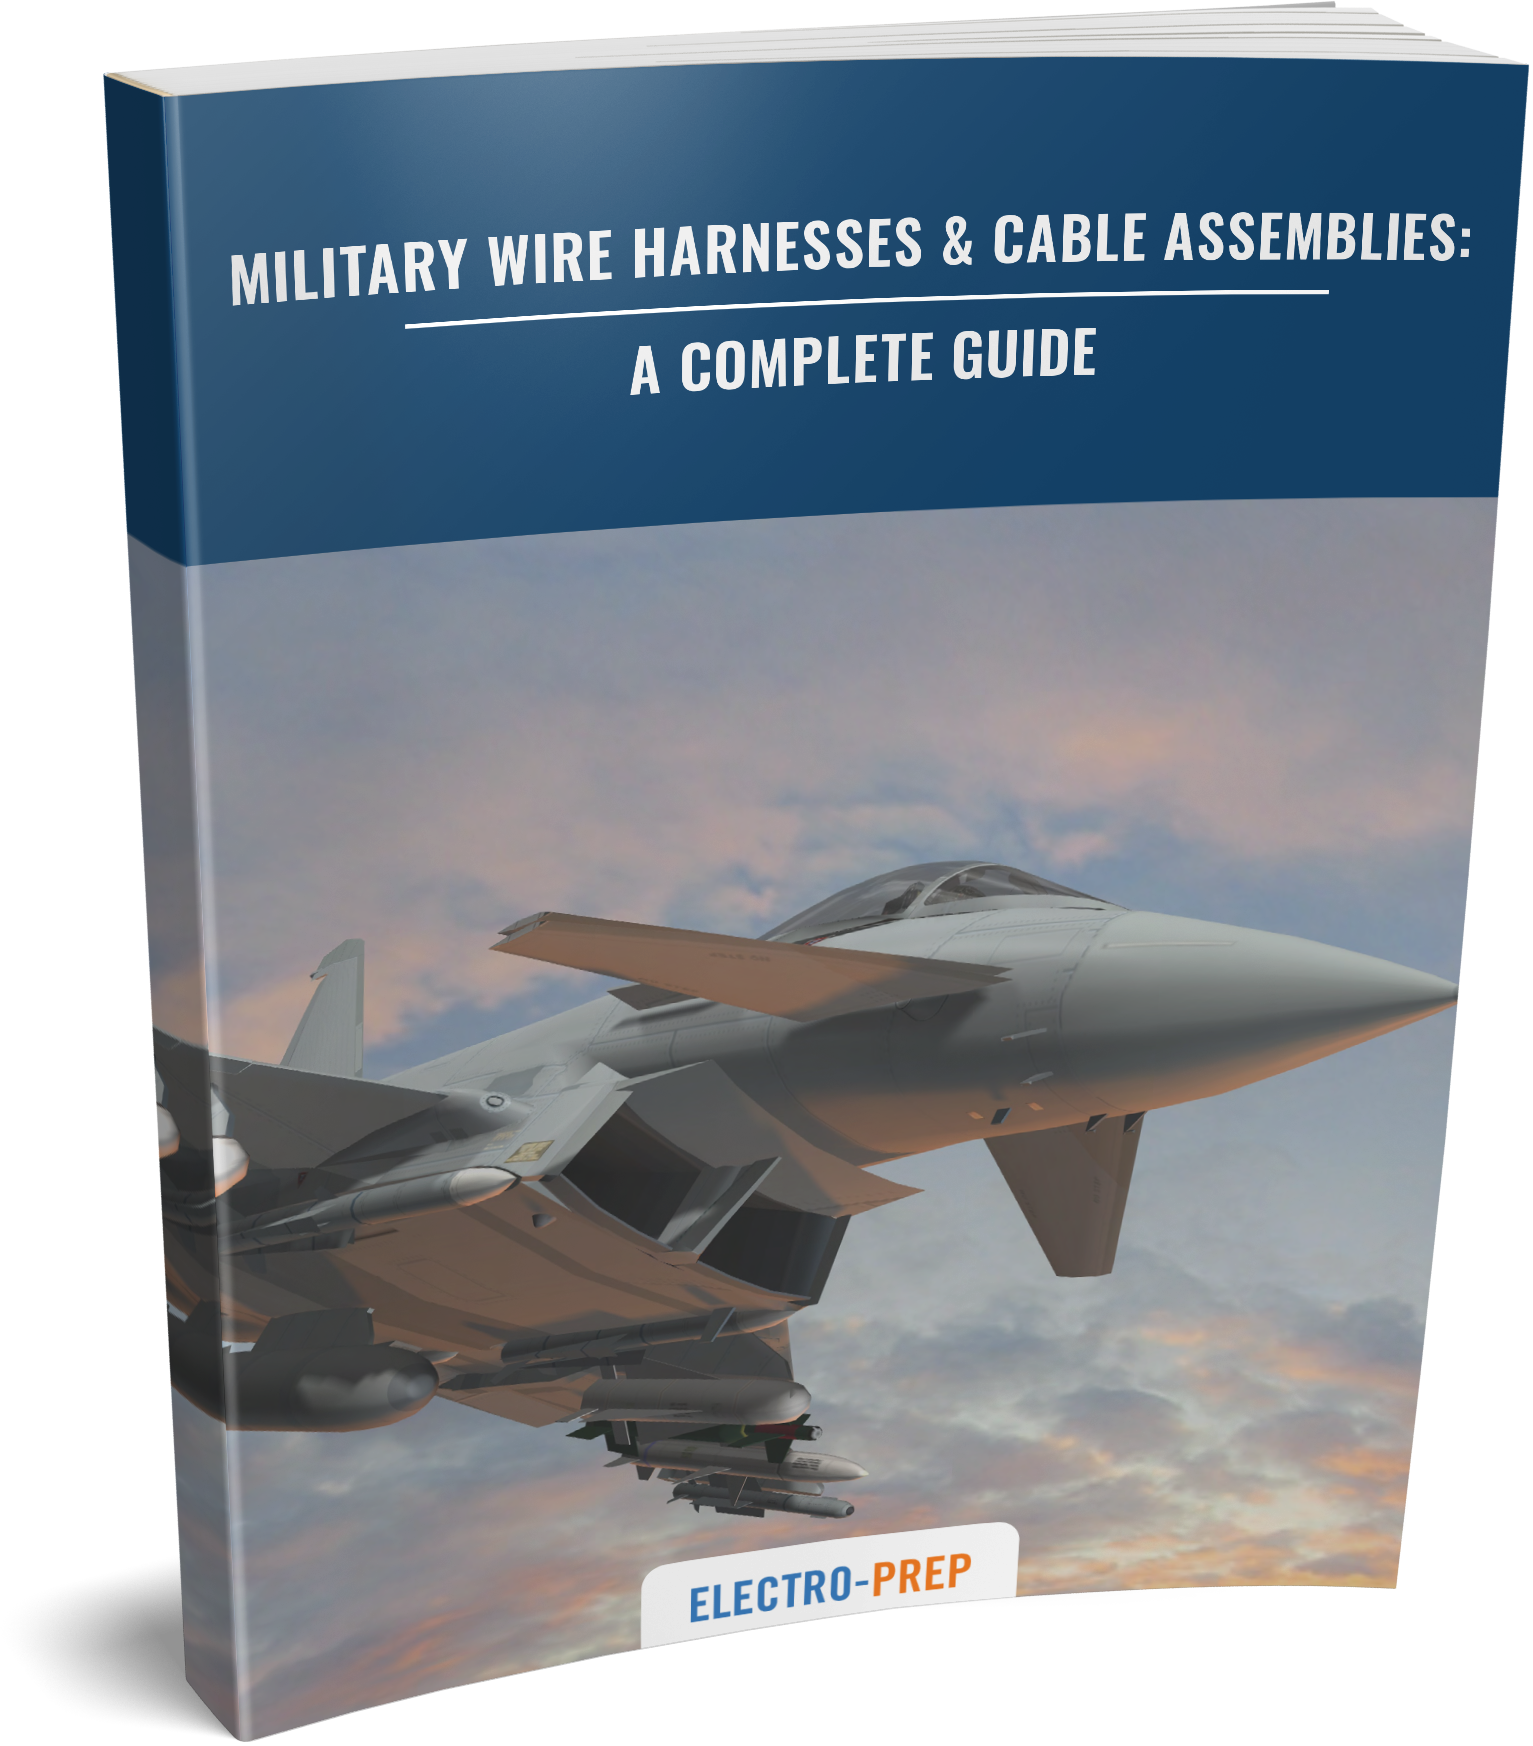 Military Wire Harnesses & Cable Assemblies: A Complete Guide